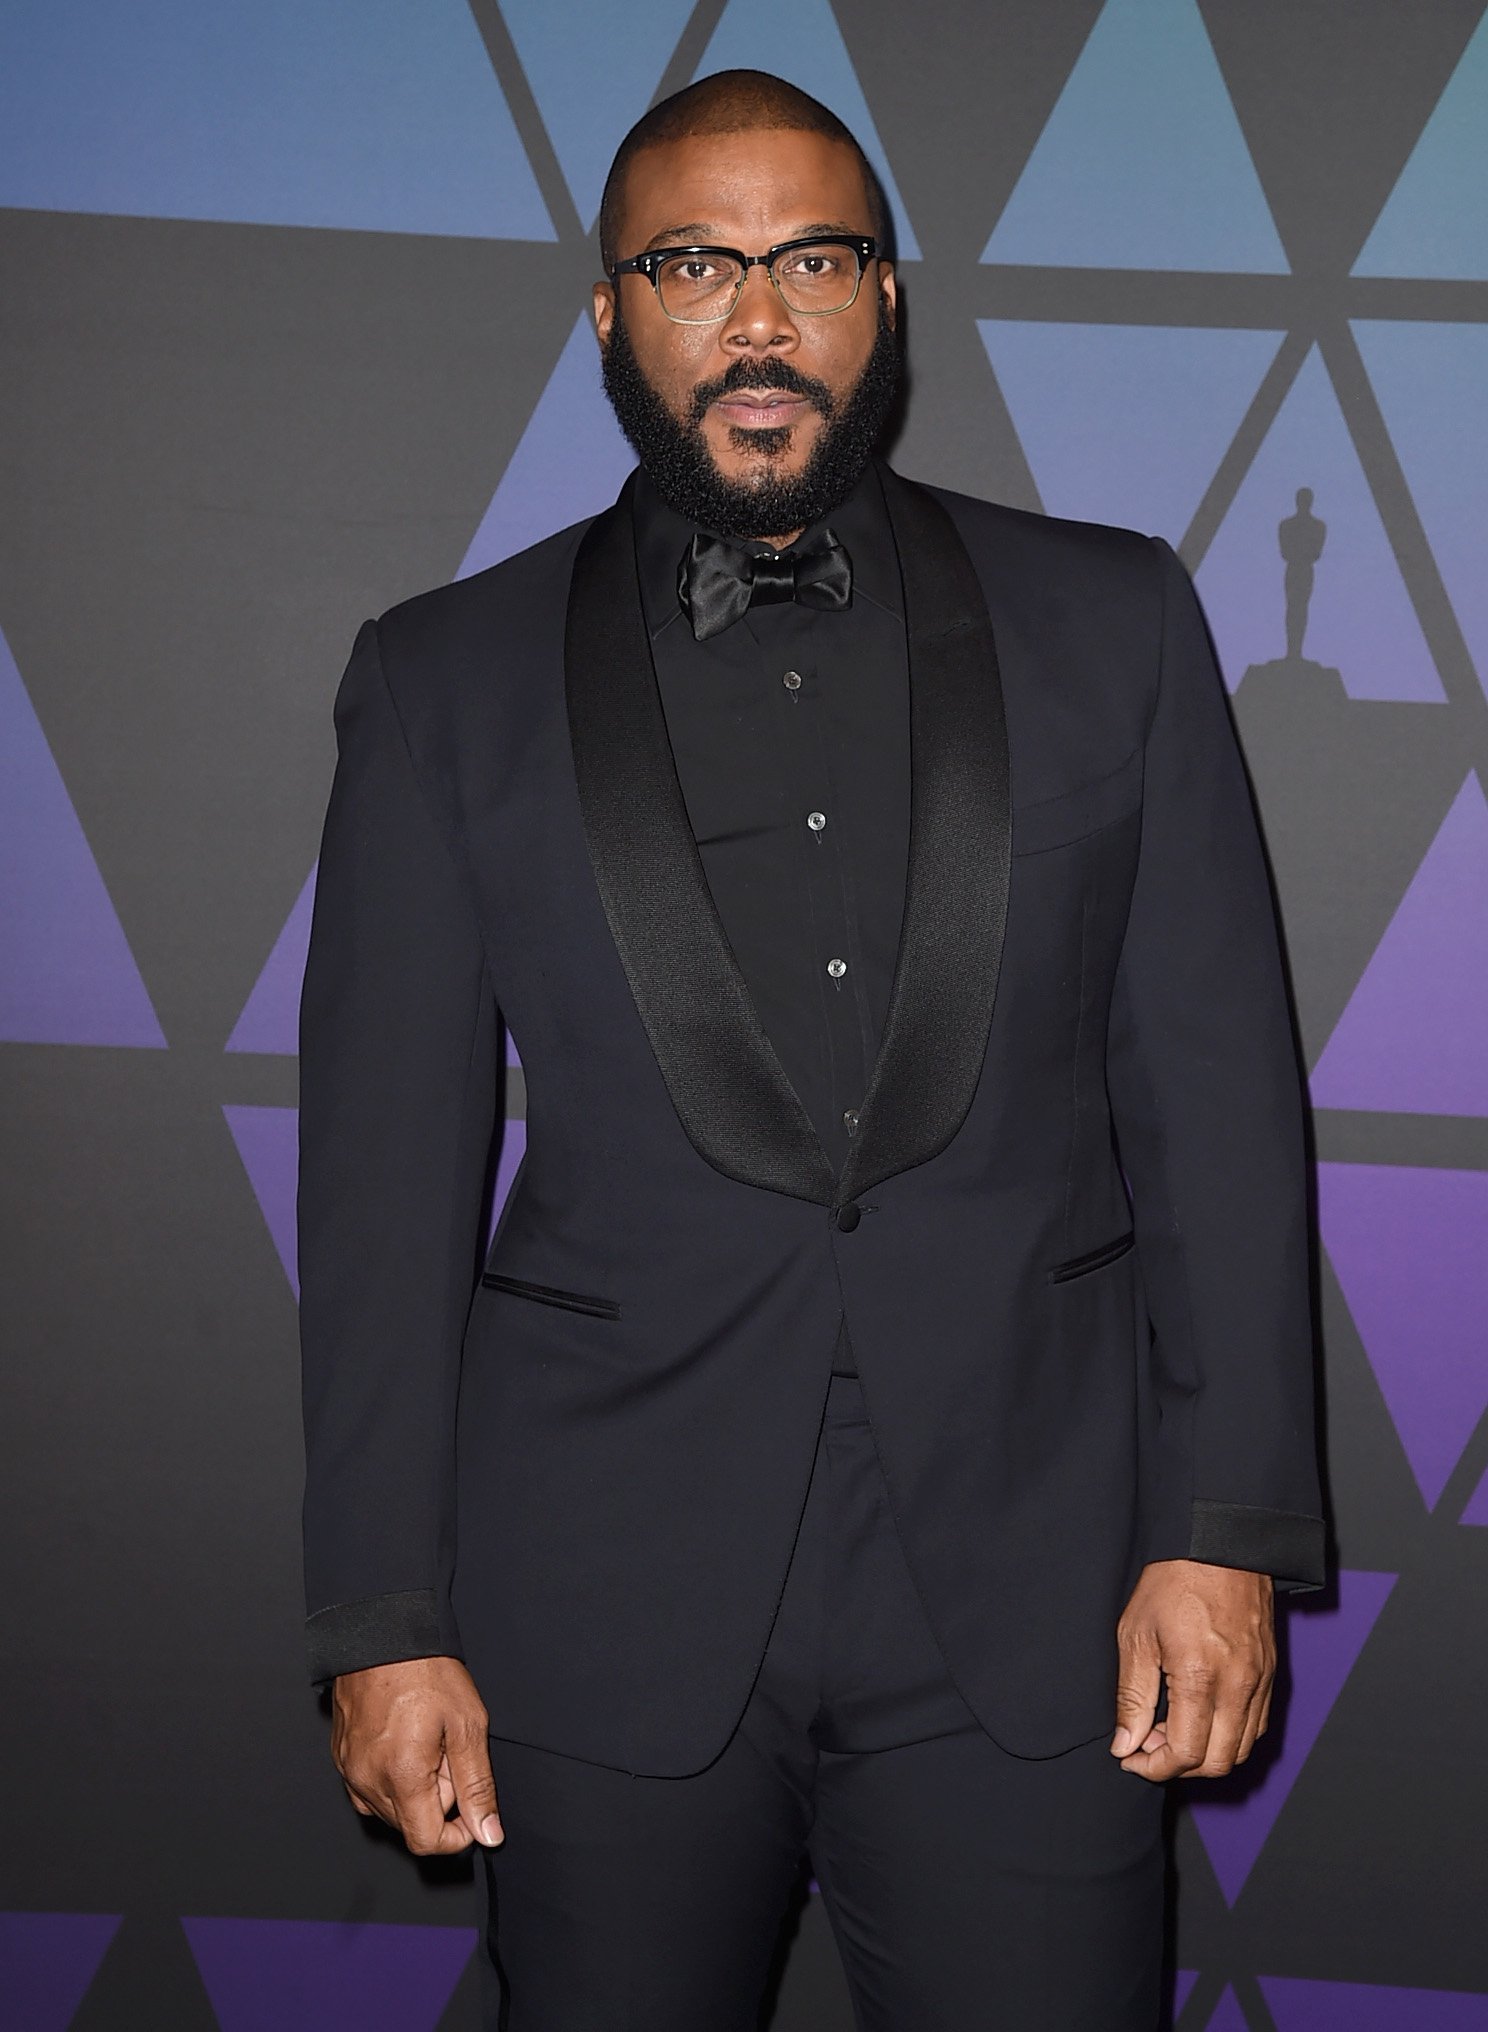 Tyler Perry at the 10th annual Governors Awards at The Ray Dolby Ballroom at Hollywood & Highland Center on November 18, 2018 | Photo: GettyImages